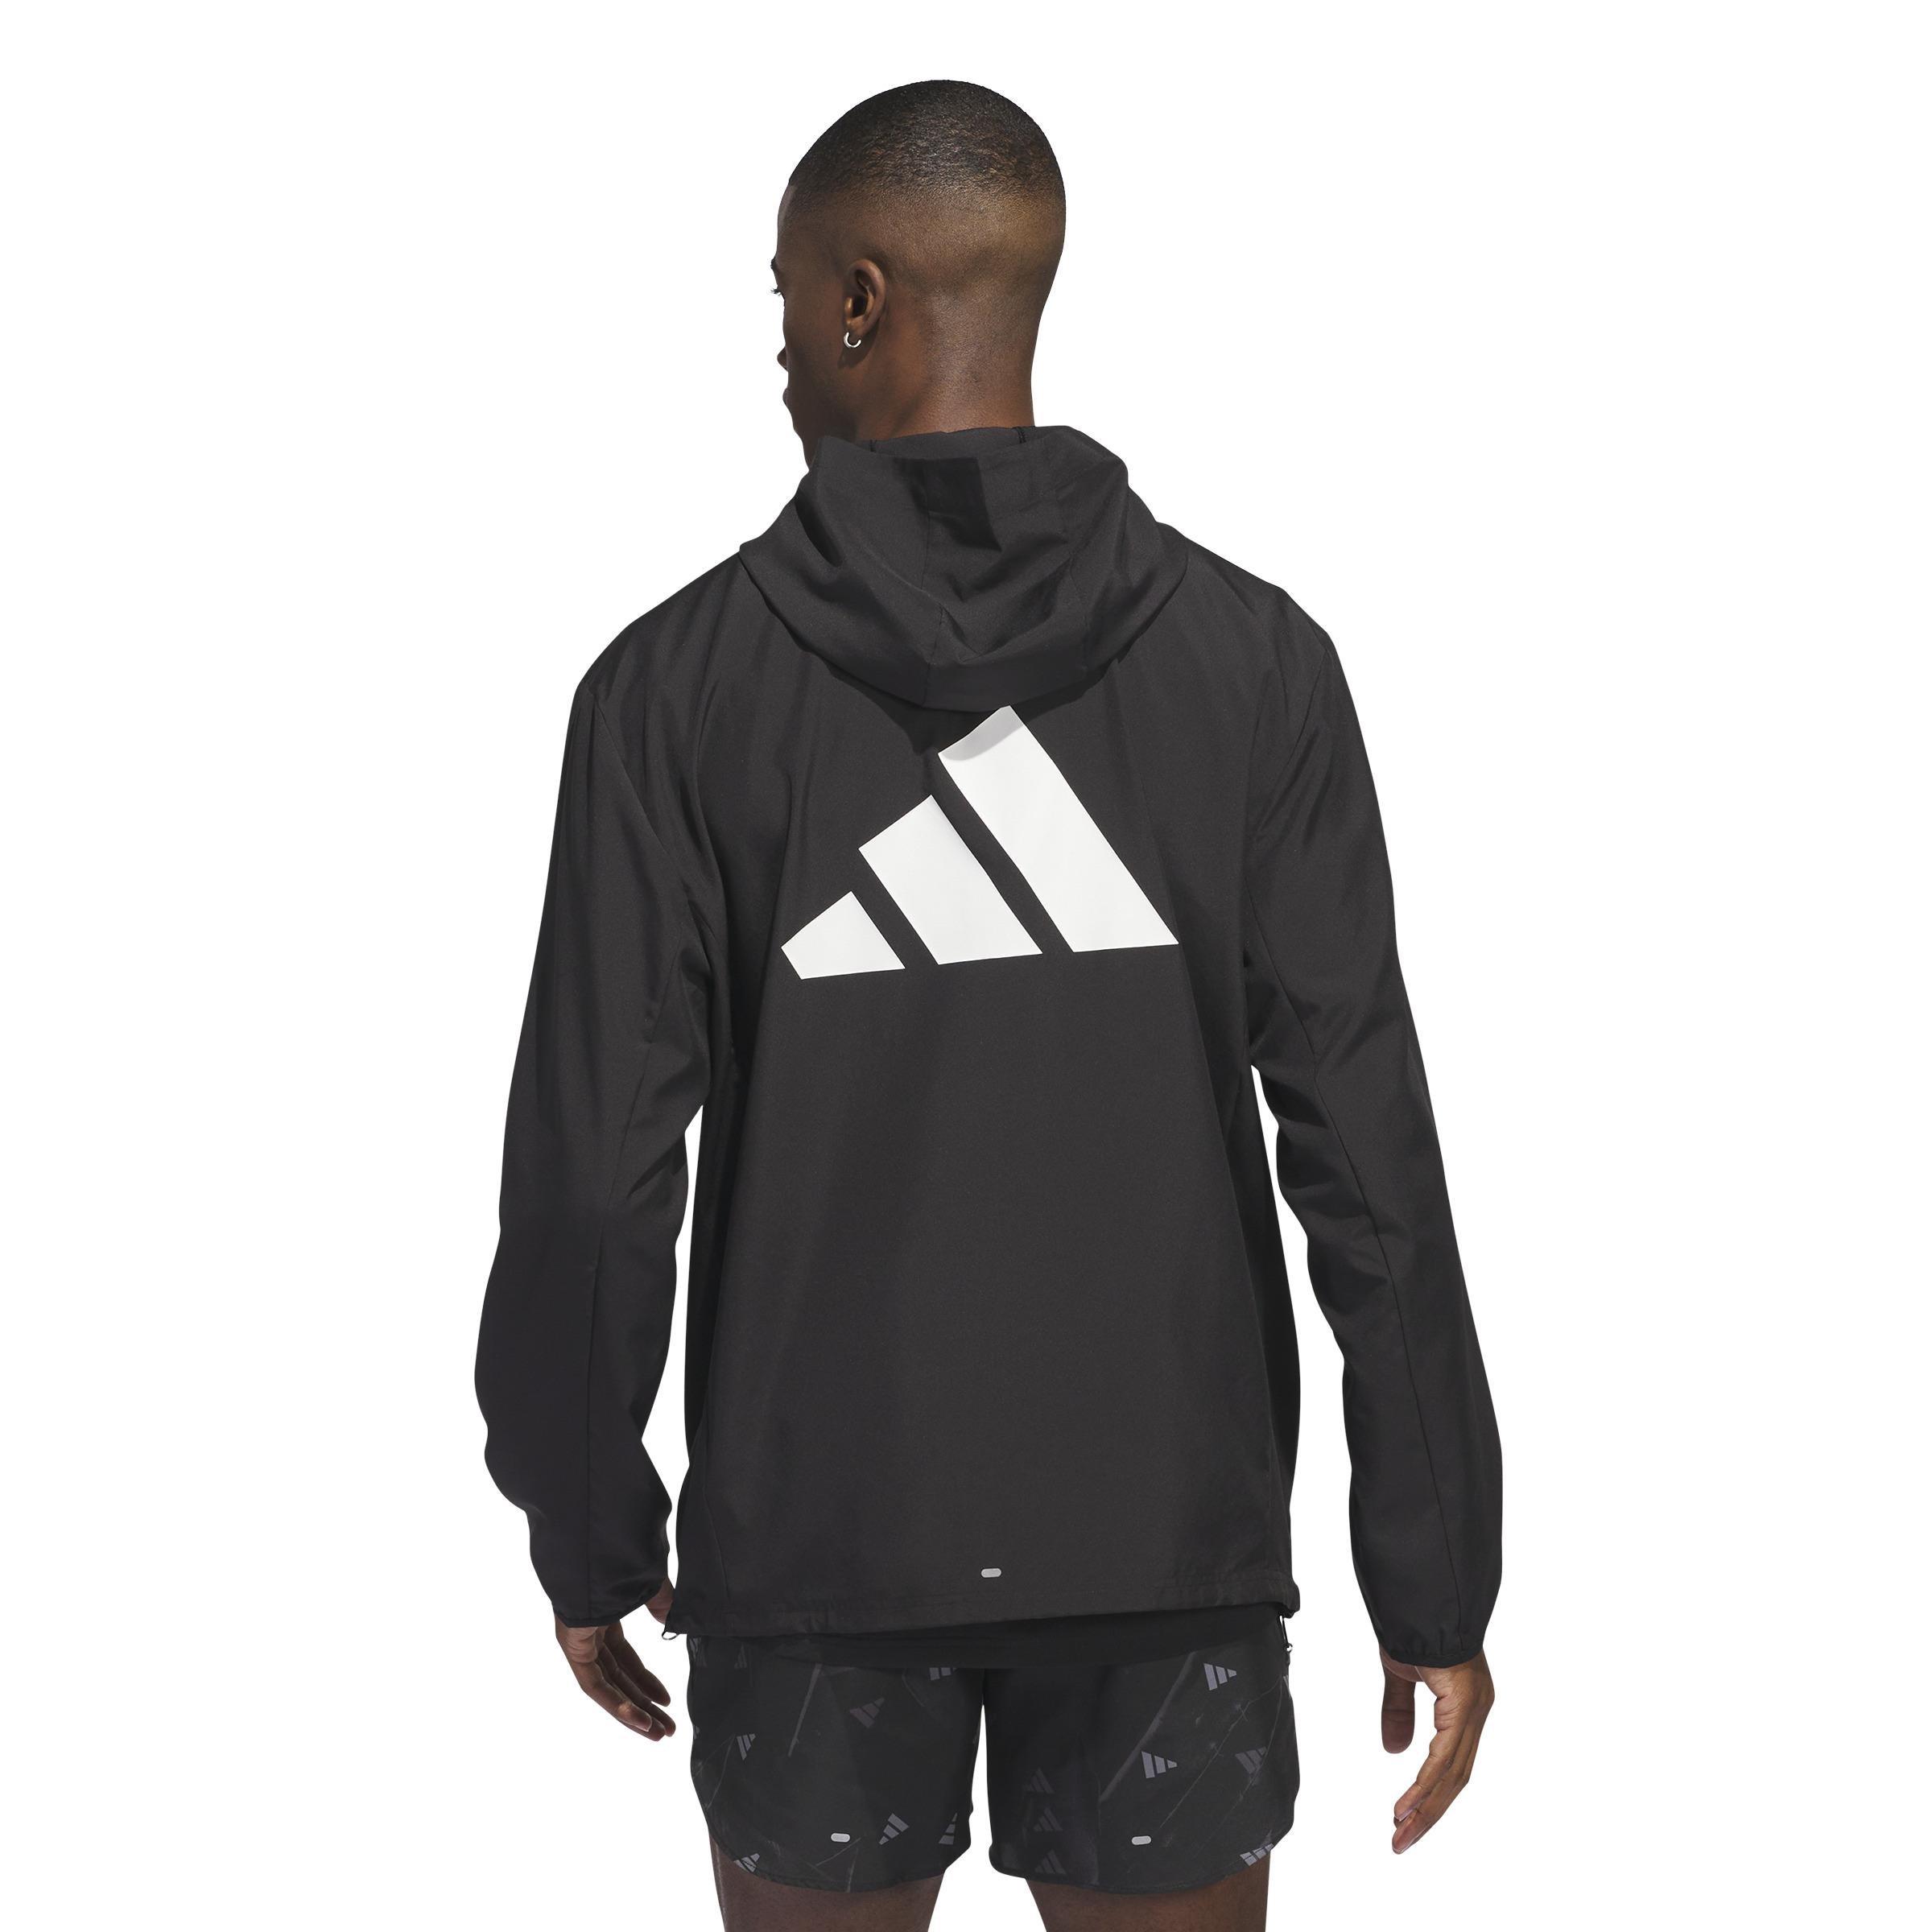 Run It Jacket BLACK Male Adult, A701_ONE, large image number 1